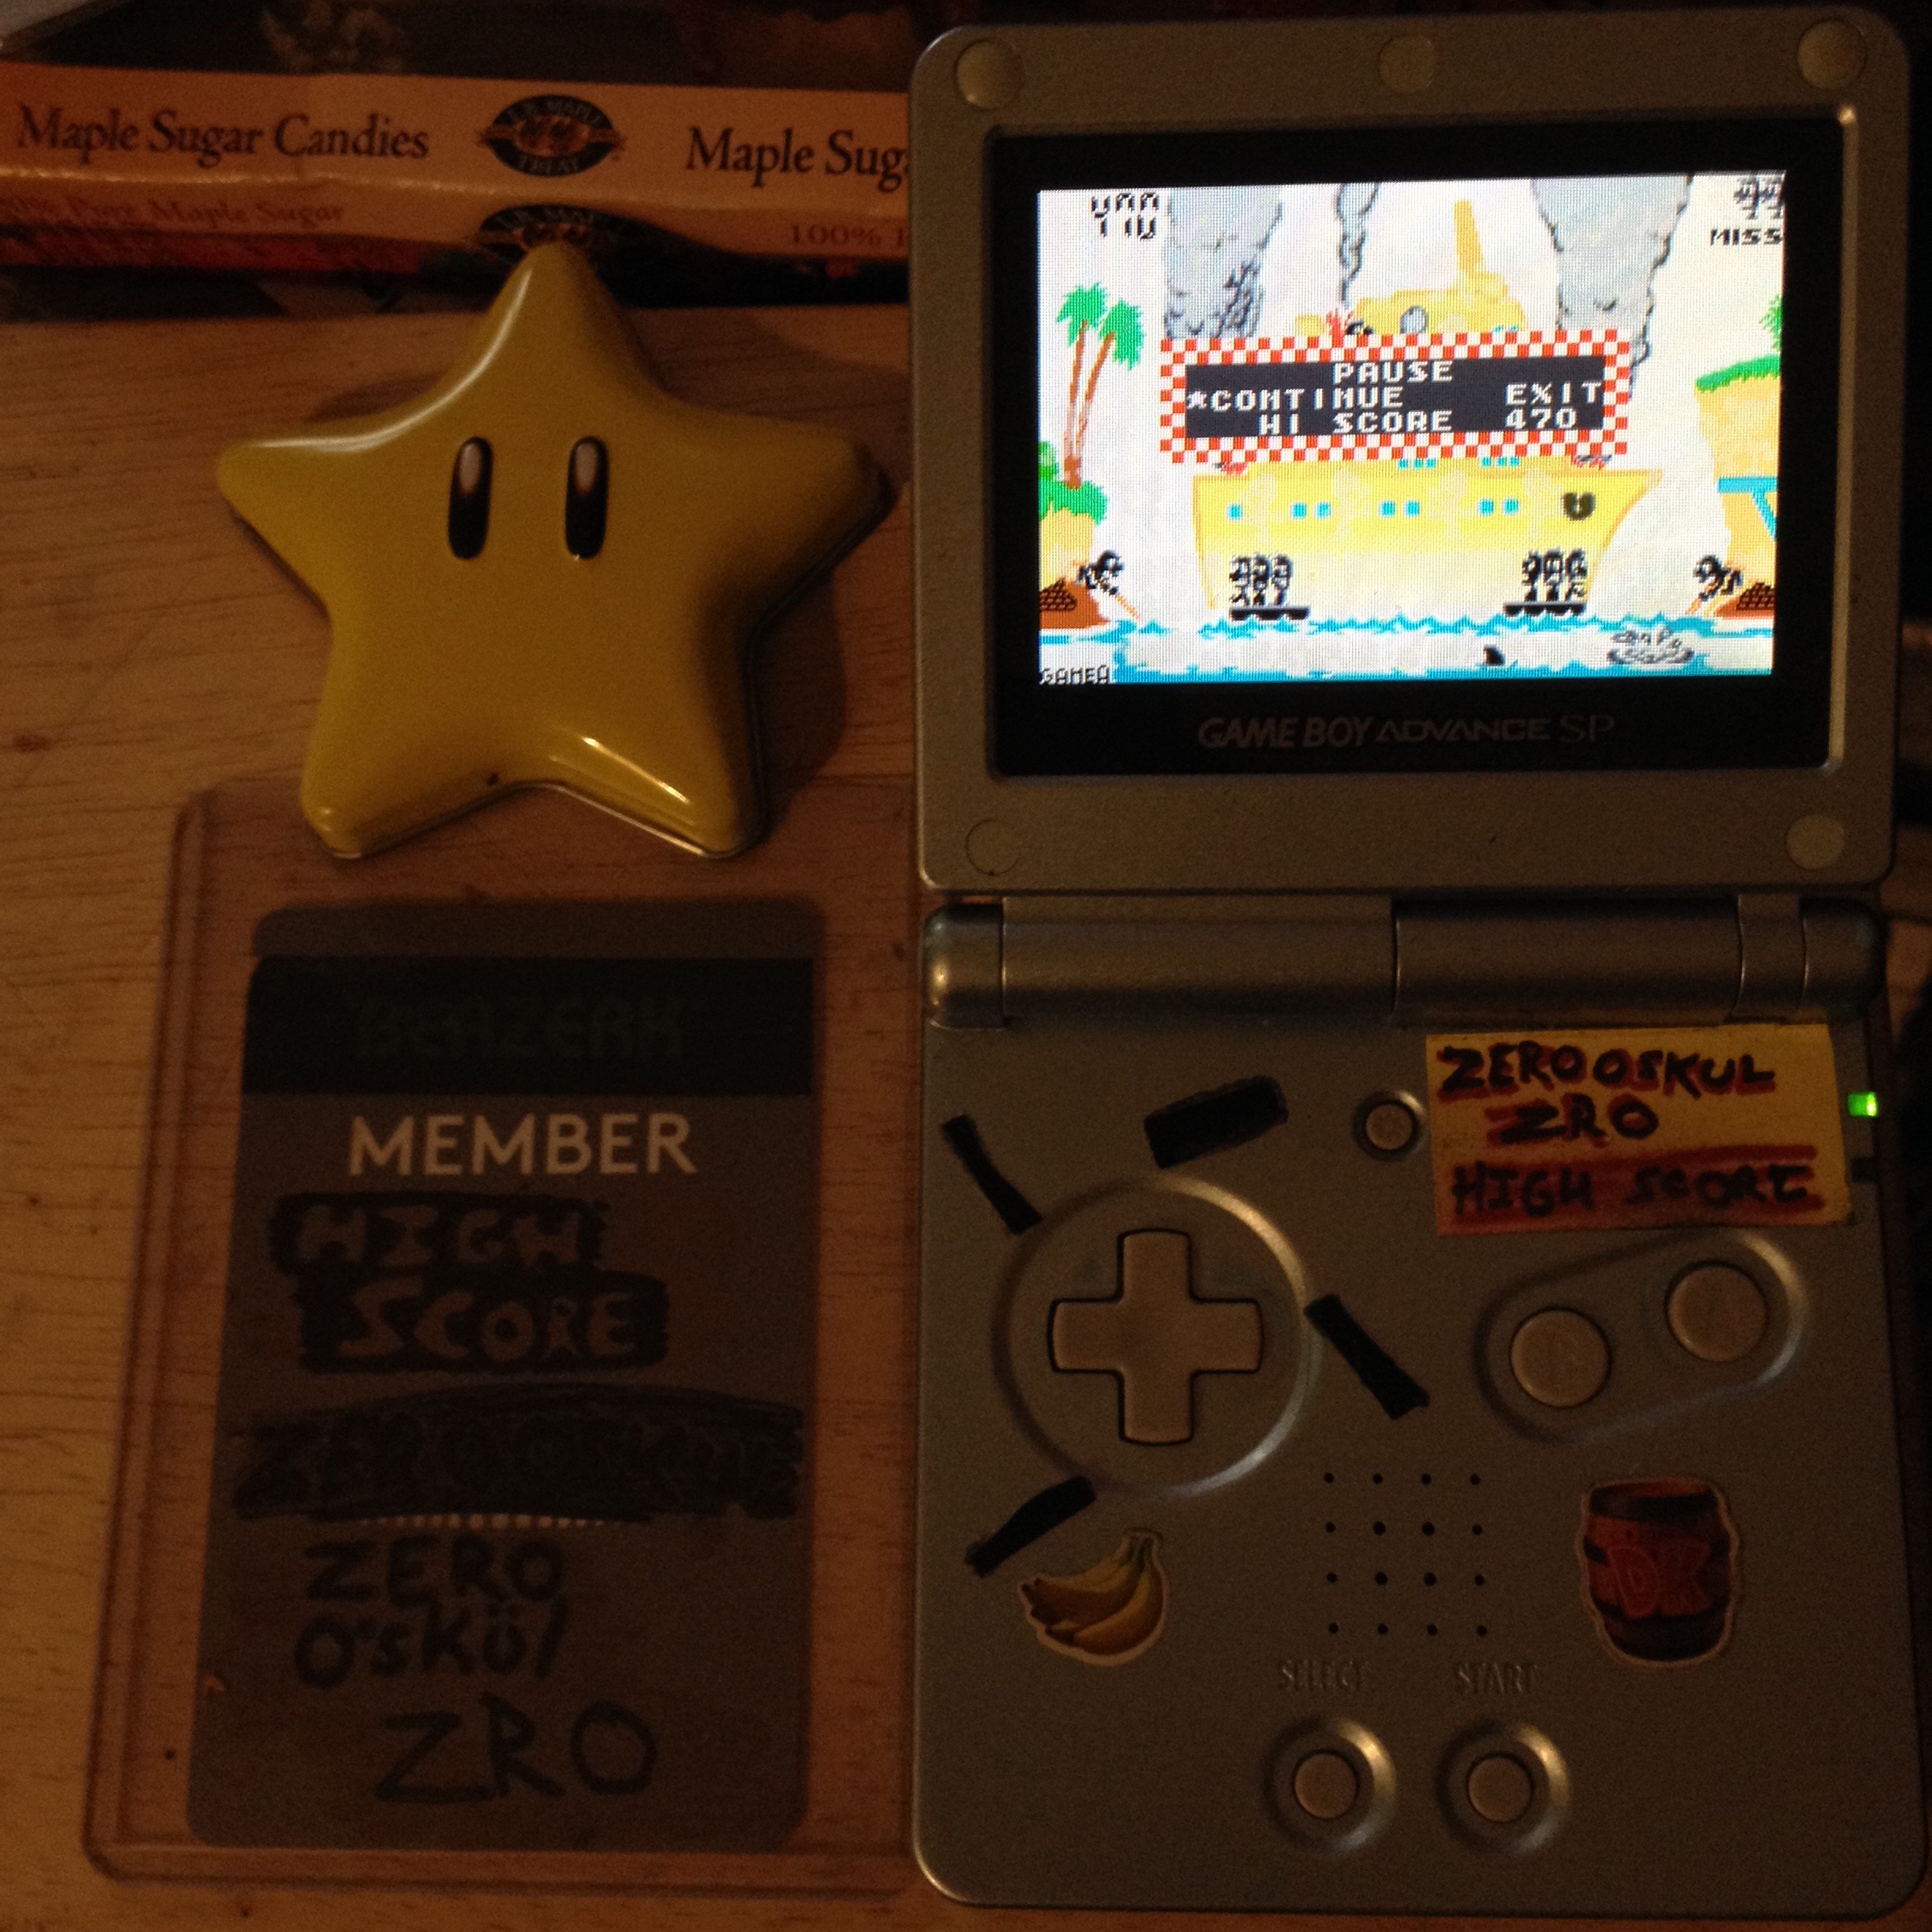 zerooskul: Game & Watch Gallery 4: Life Boat [Classic: Easy] (GBA) 487 points on 2019-08-20 18:07:54